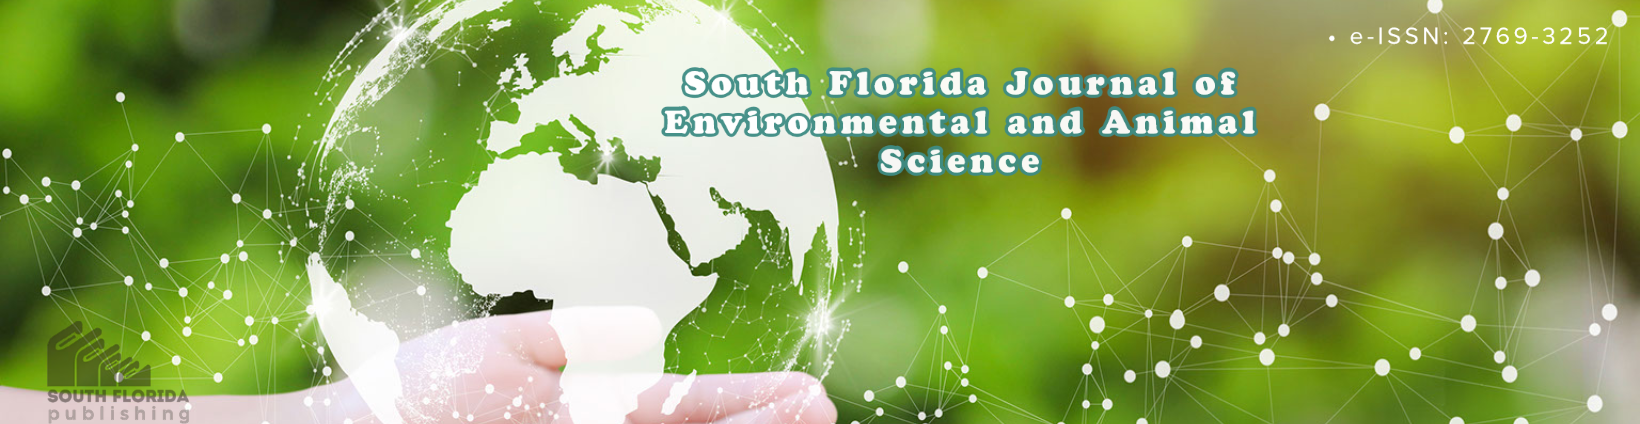 South Florida Journal of Environmental and Animal Science